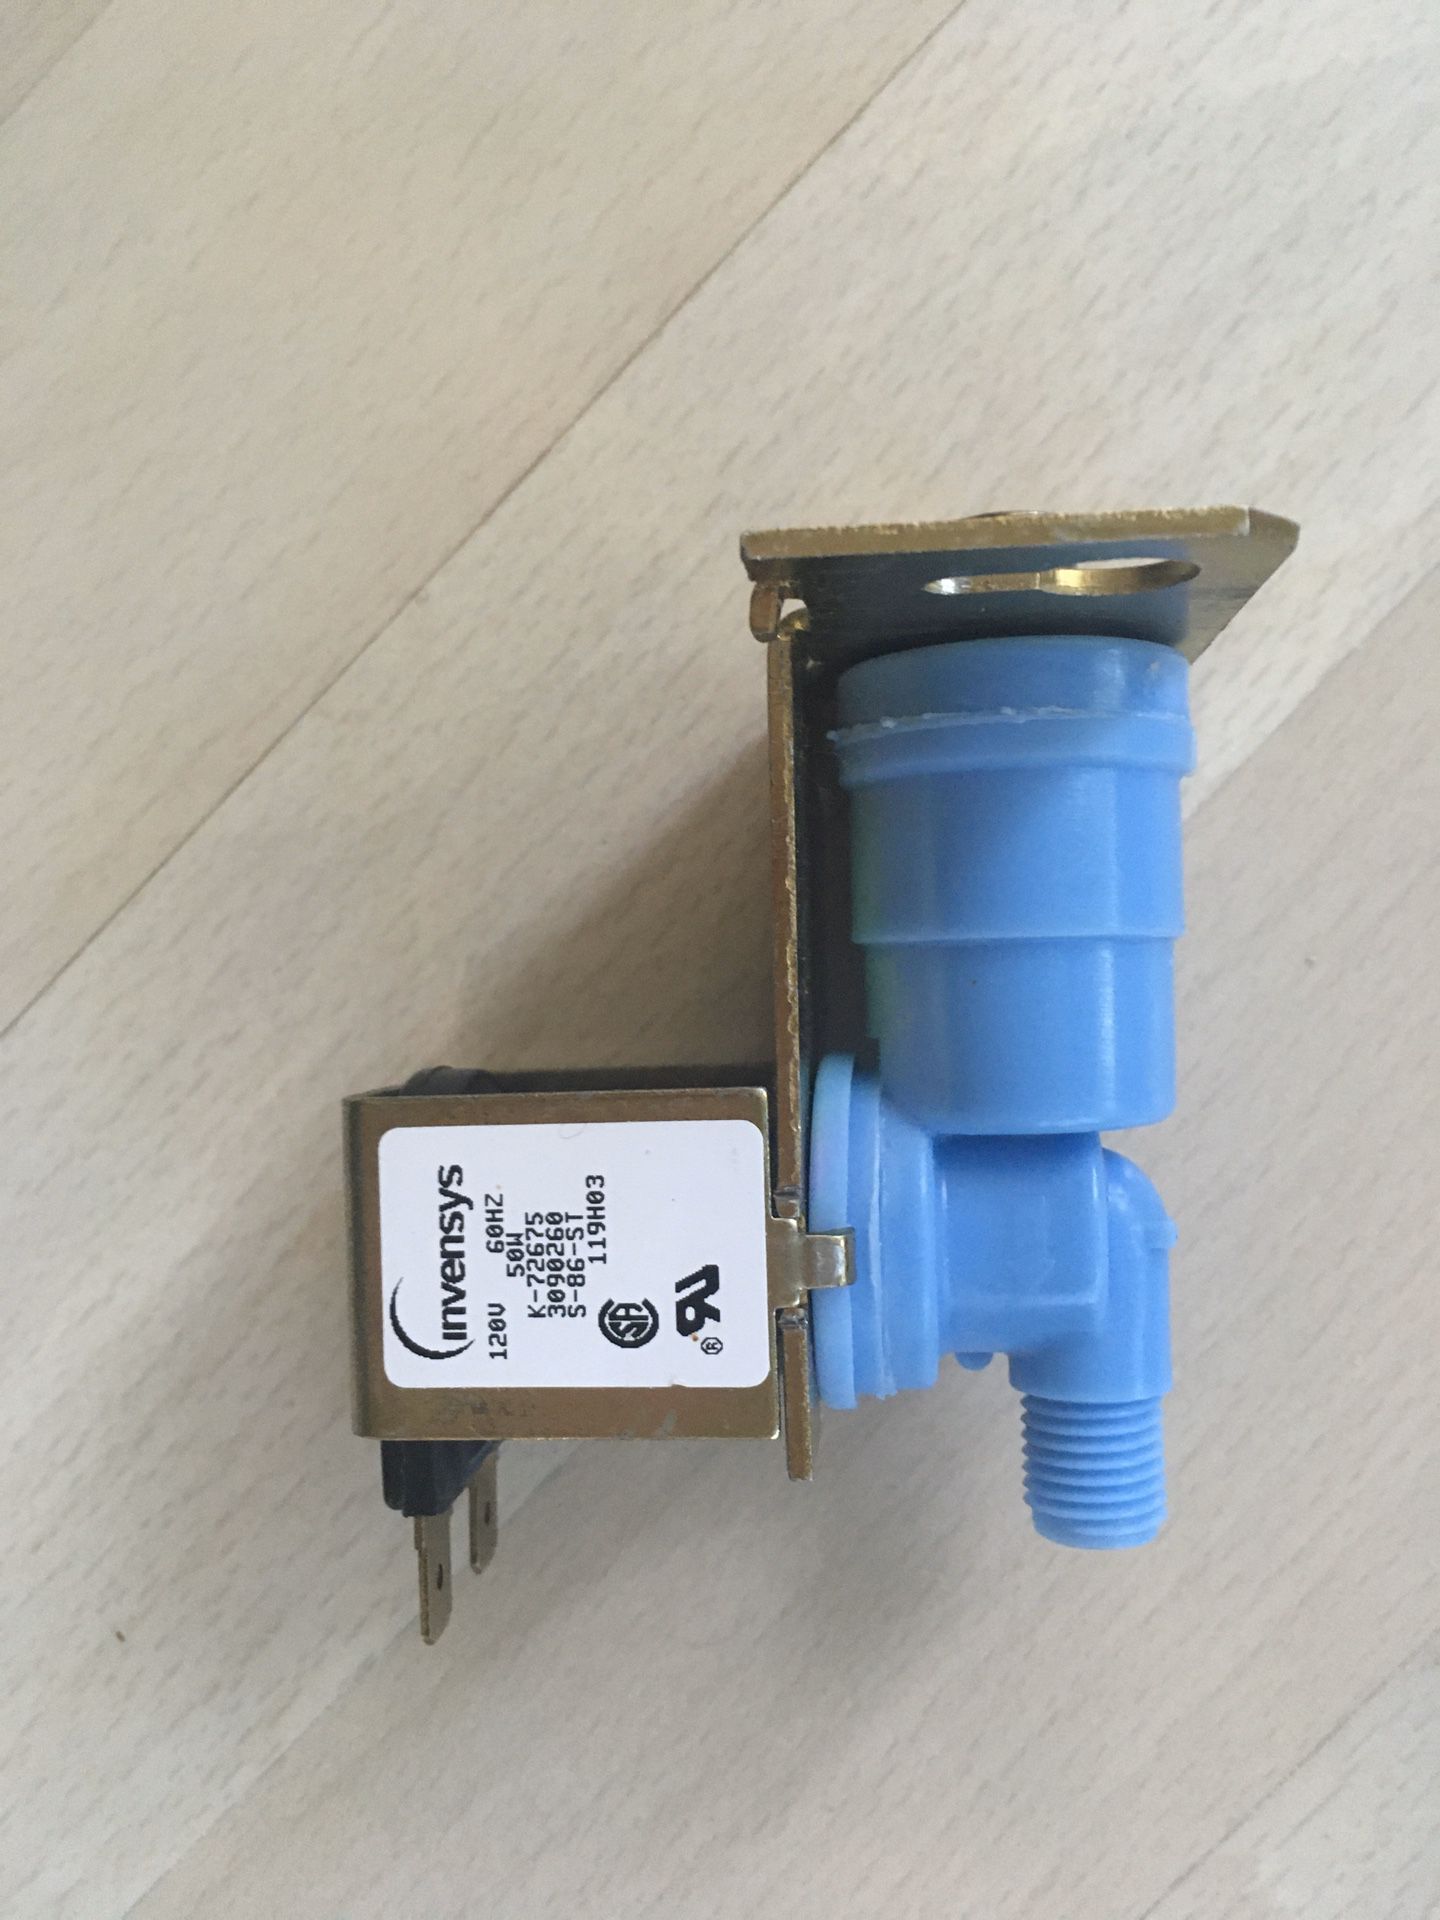 Subzero refrigerator water valve used (other subzero parts available different prices some no shipping) inquire